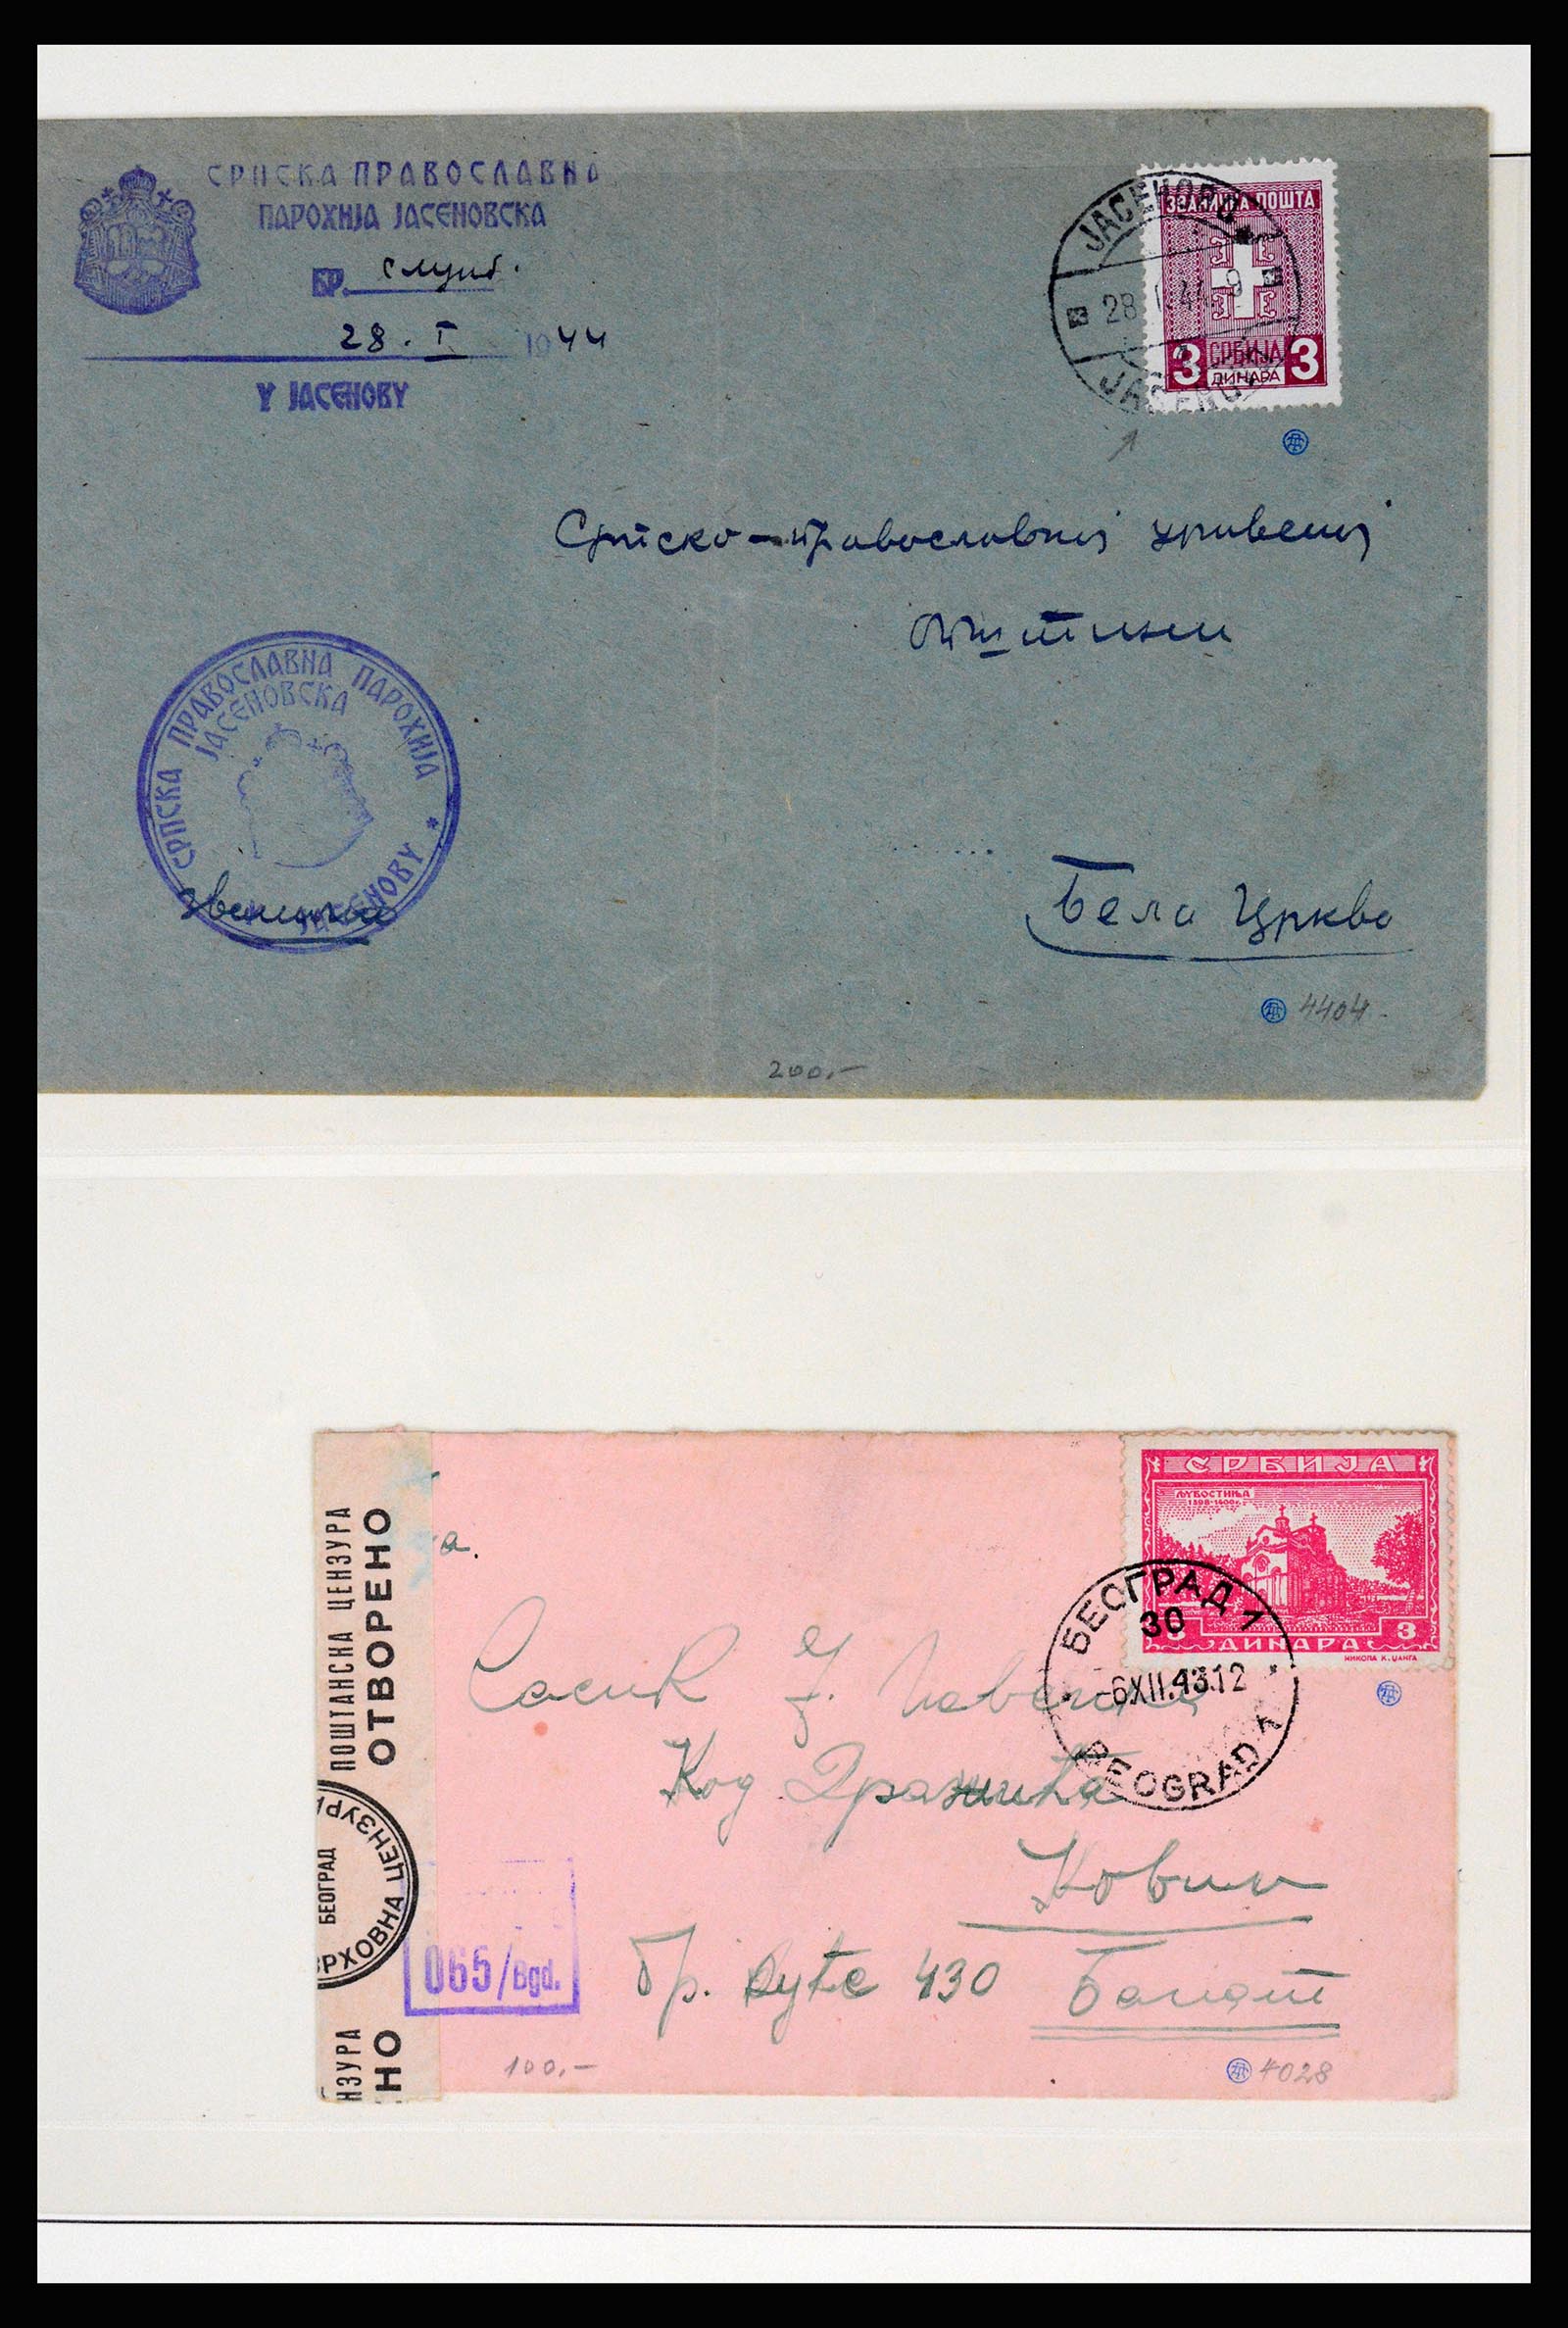 37066 020 - Stamp collection 37066 Serbia covers WW II.